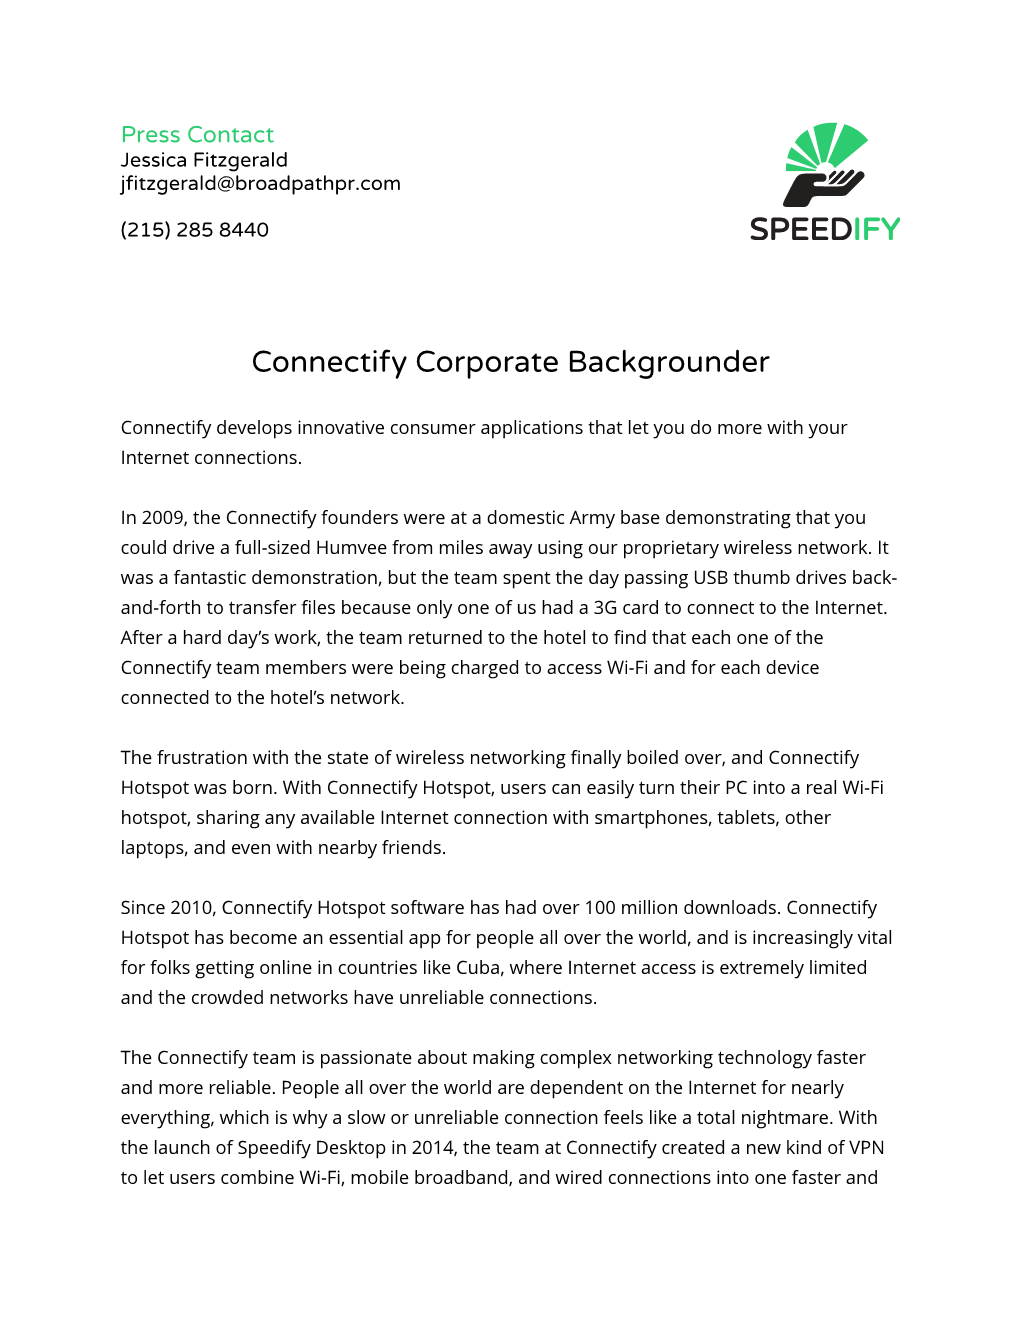 Connectify Corporate Backgrounder